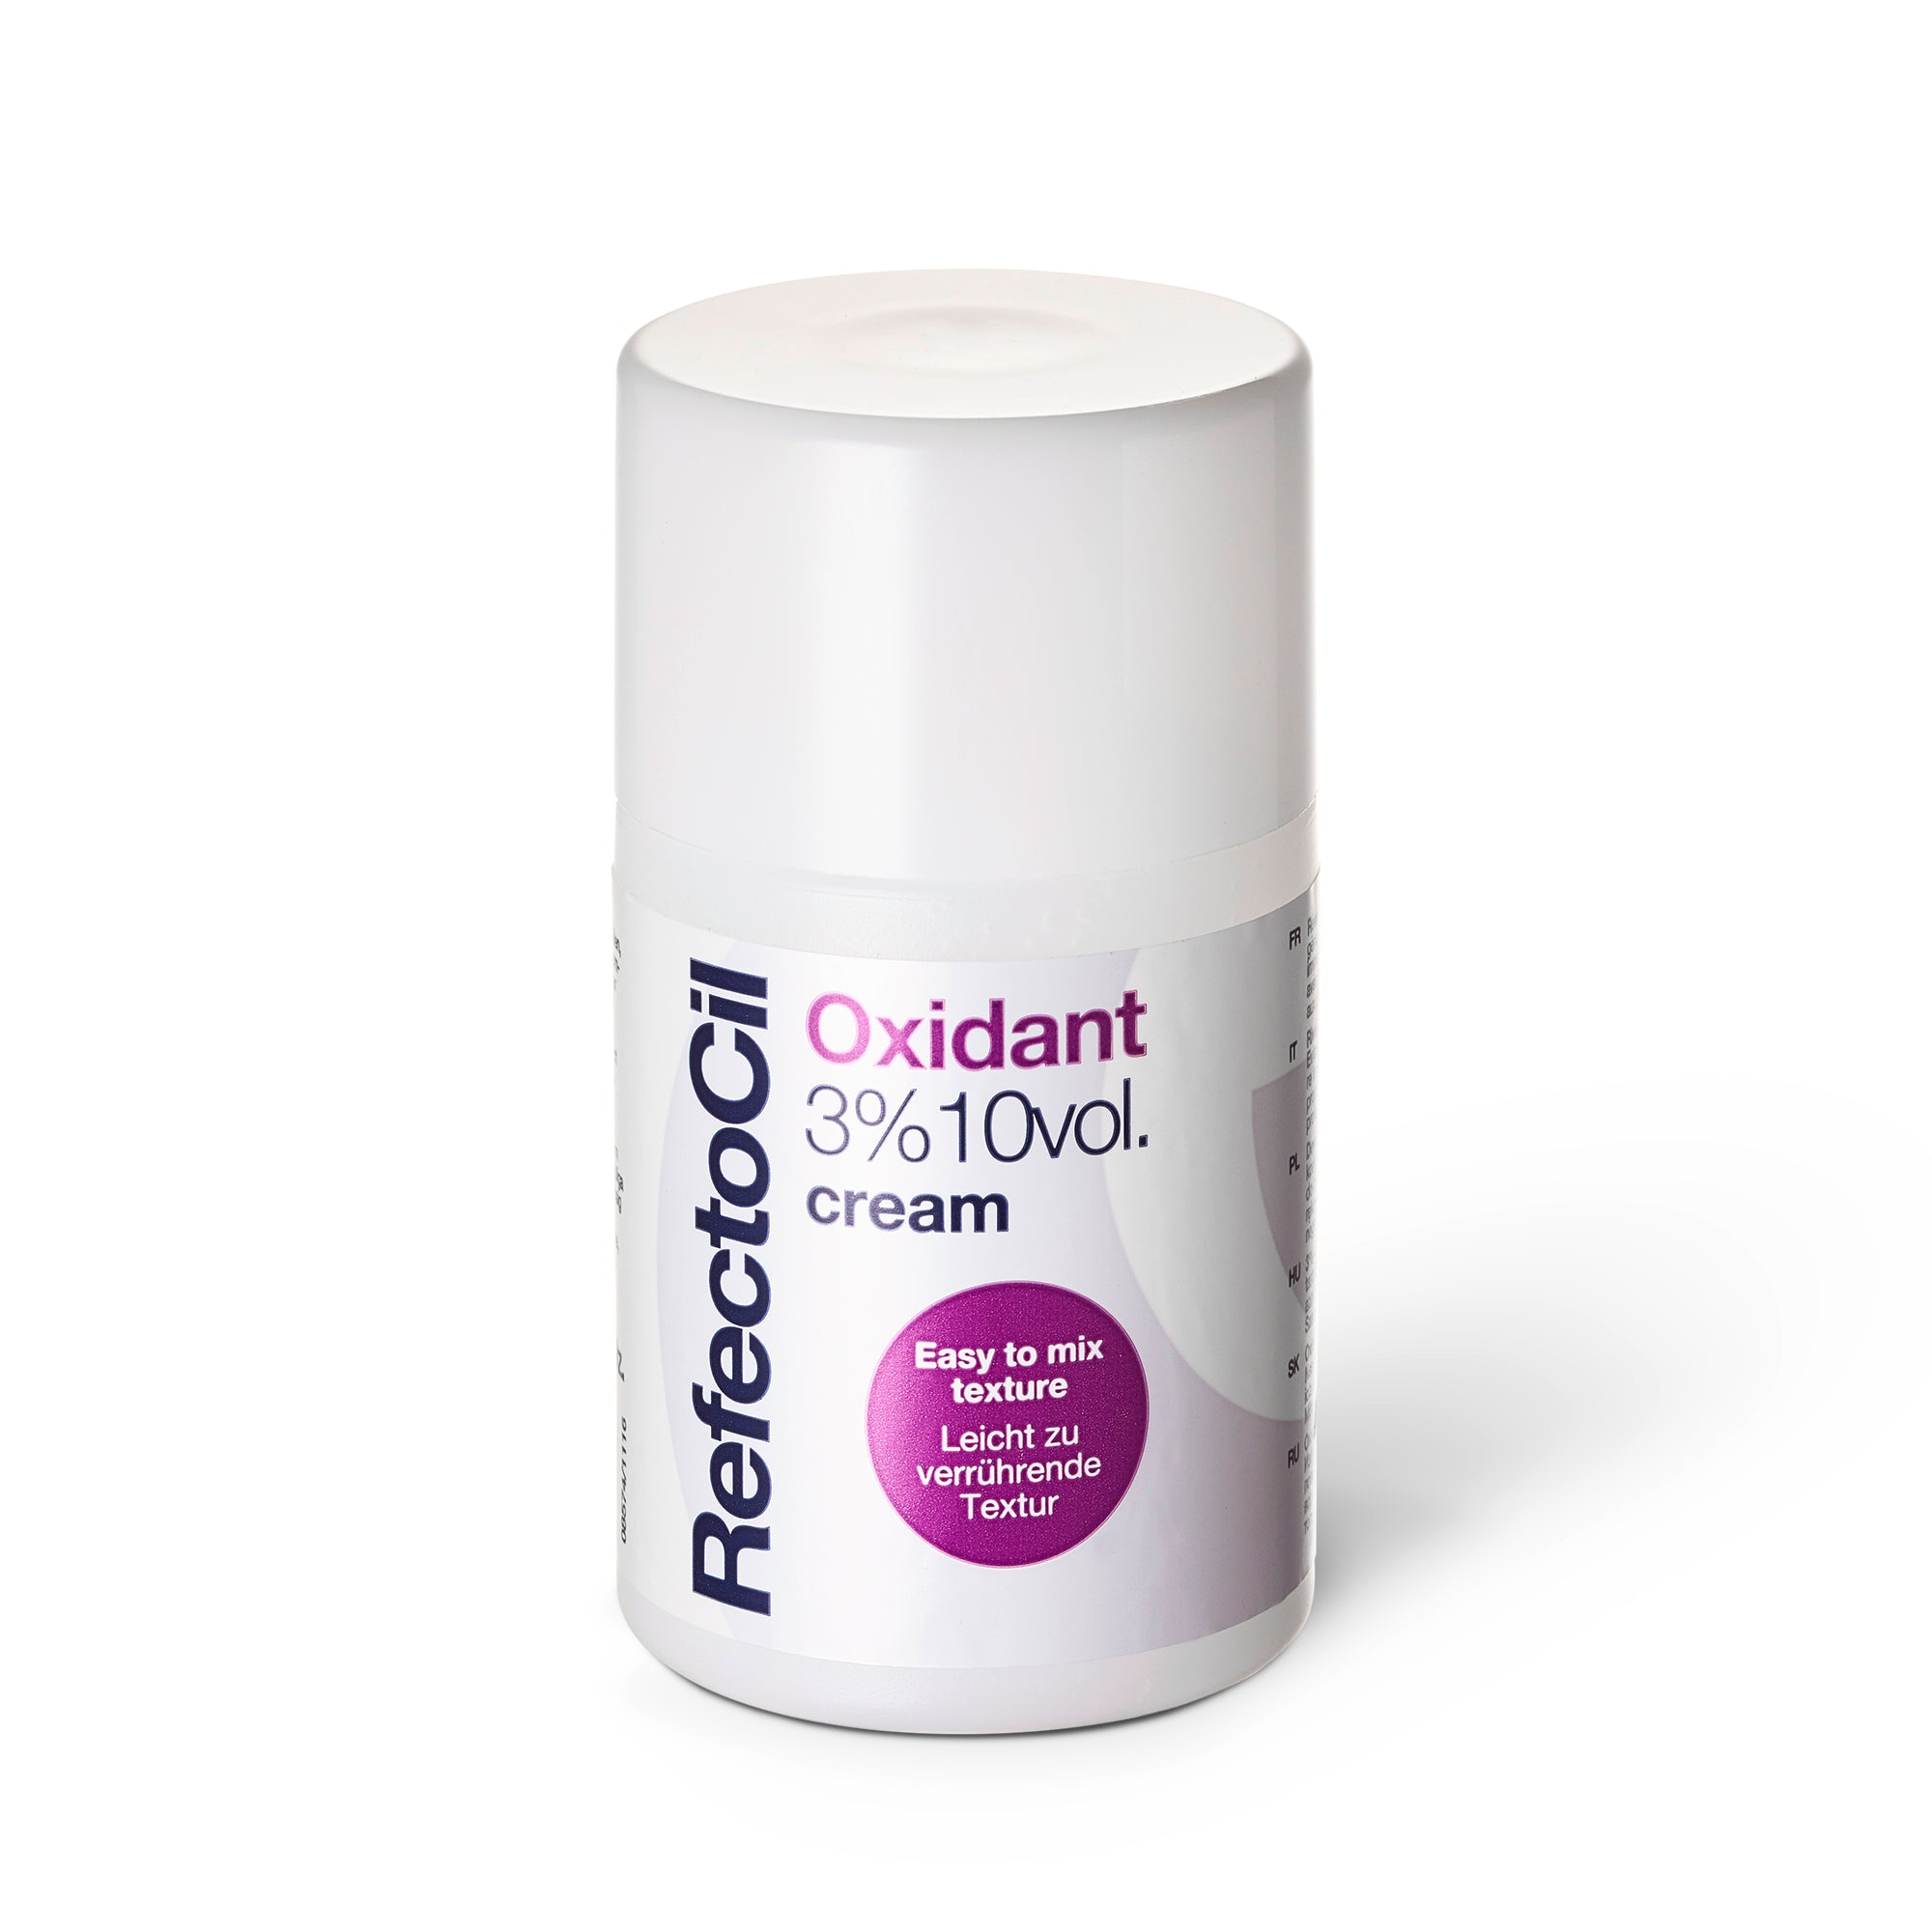 RefectoCil Oxidant 3% - Creata Beauty - Professional Beauty Products